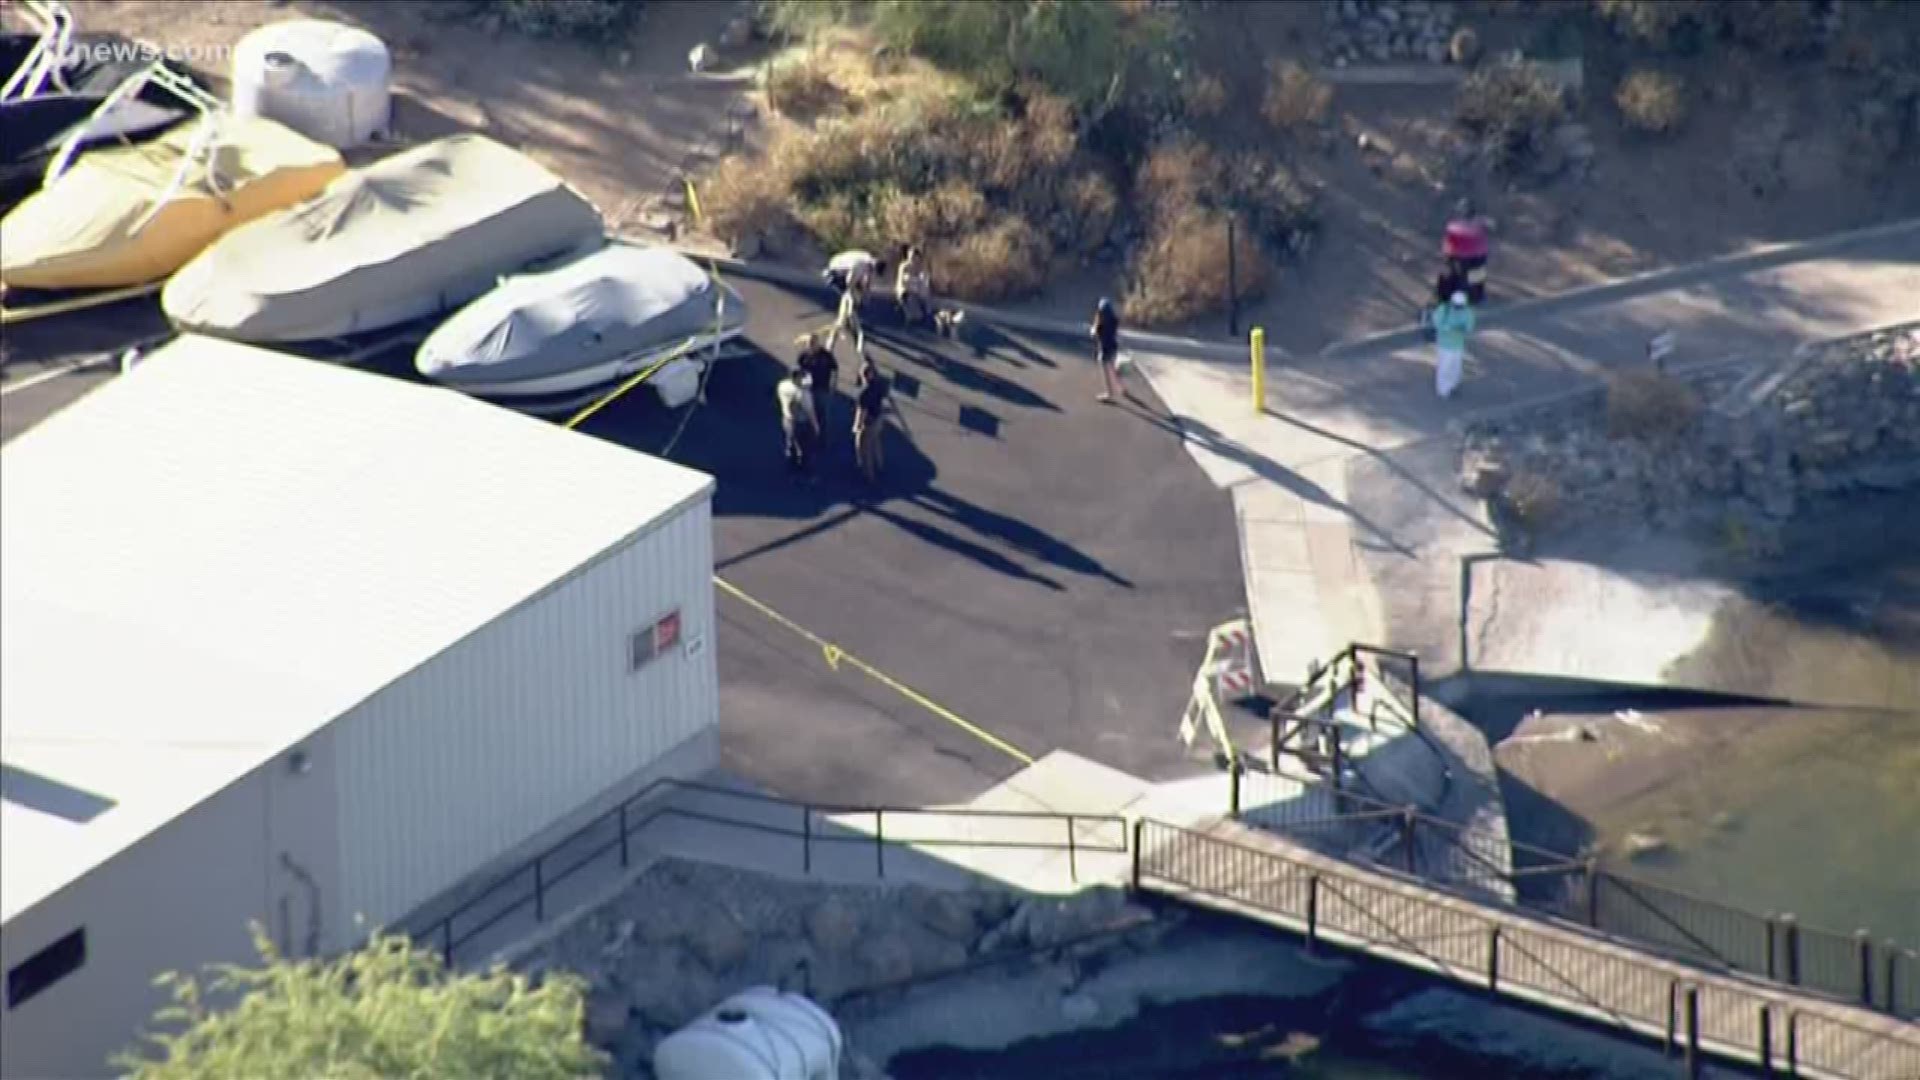 Rural Metro Fire is reporting that a man has been shot twice at Saguaro Lake, northwest of Mesa. Medics say they are working a trauma code and several MCSO deputies could be seen by Sky 12.